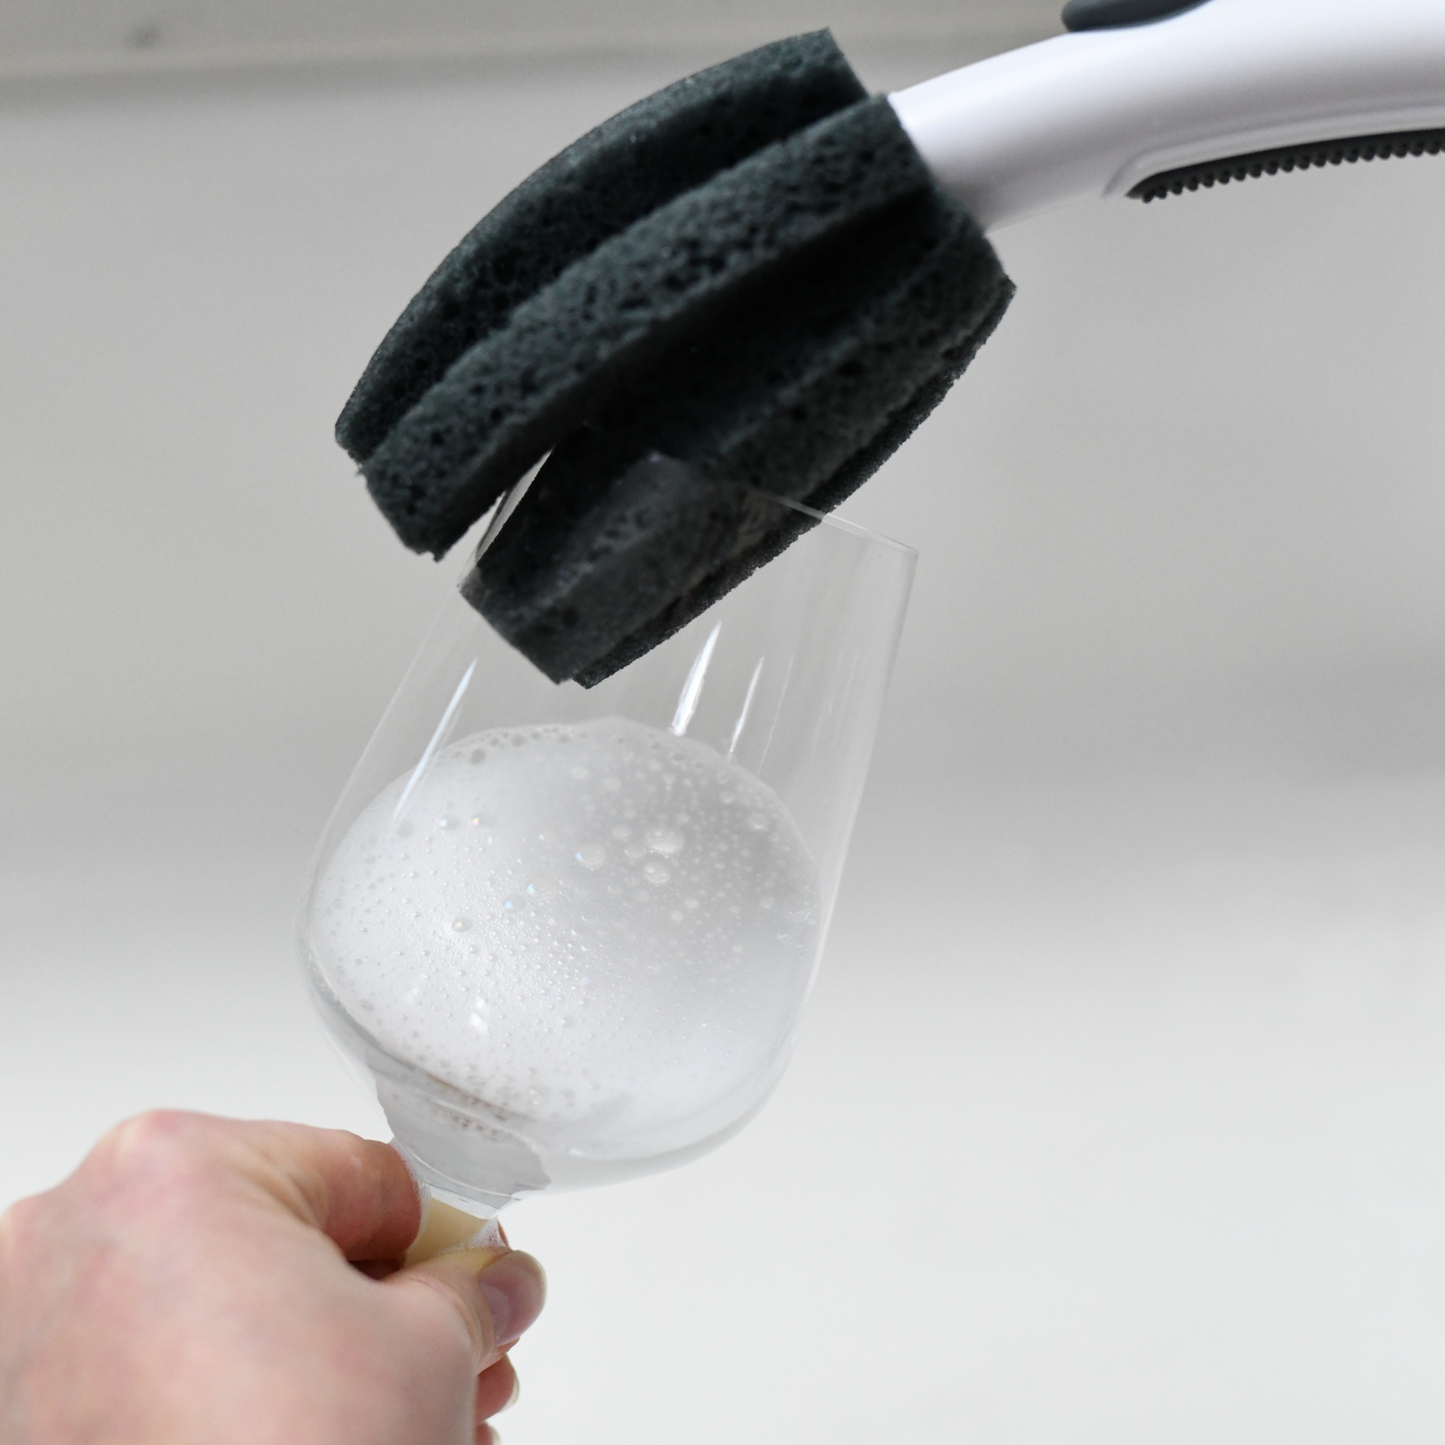 Specially designed sponge to clean the rim of your wine glass